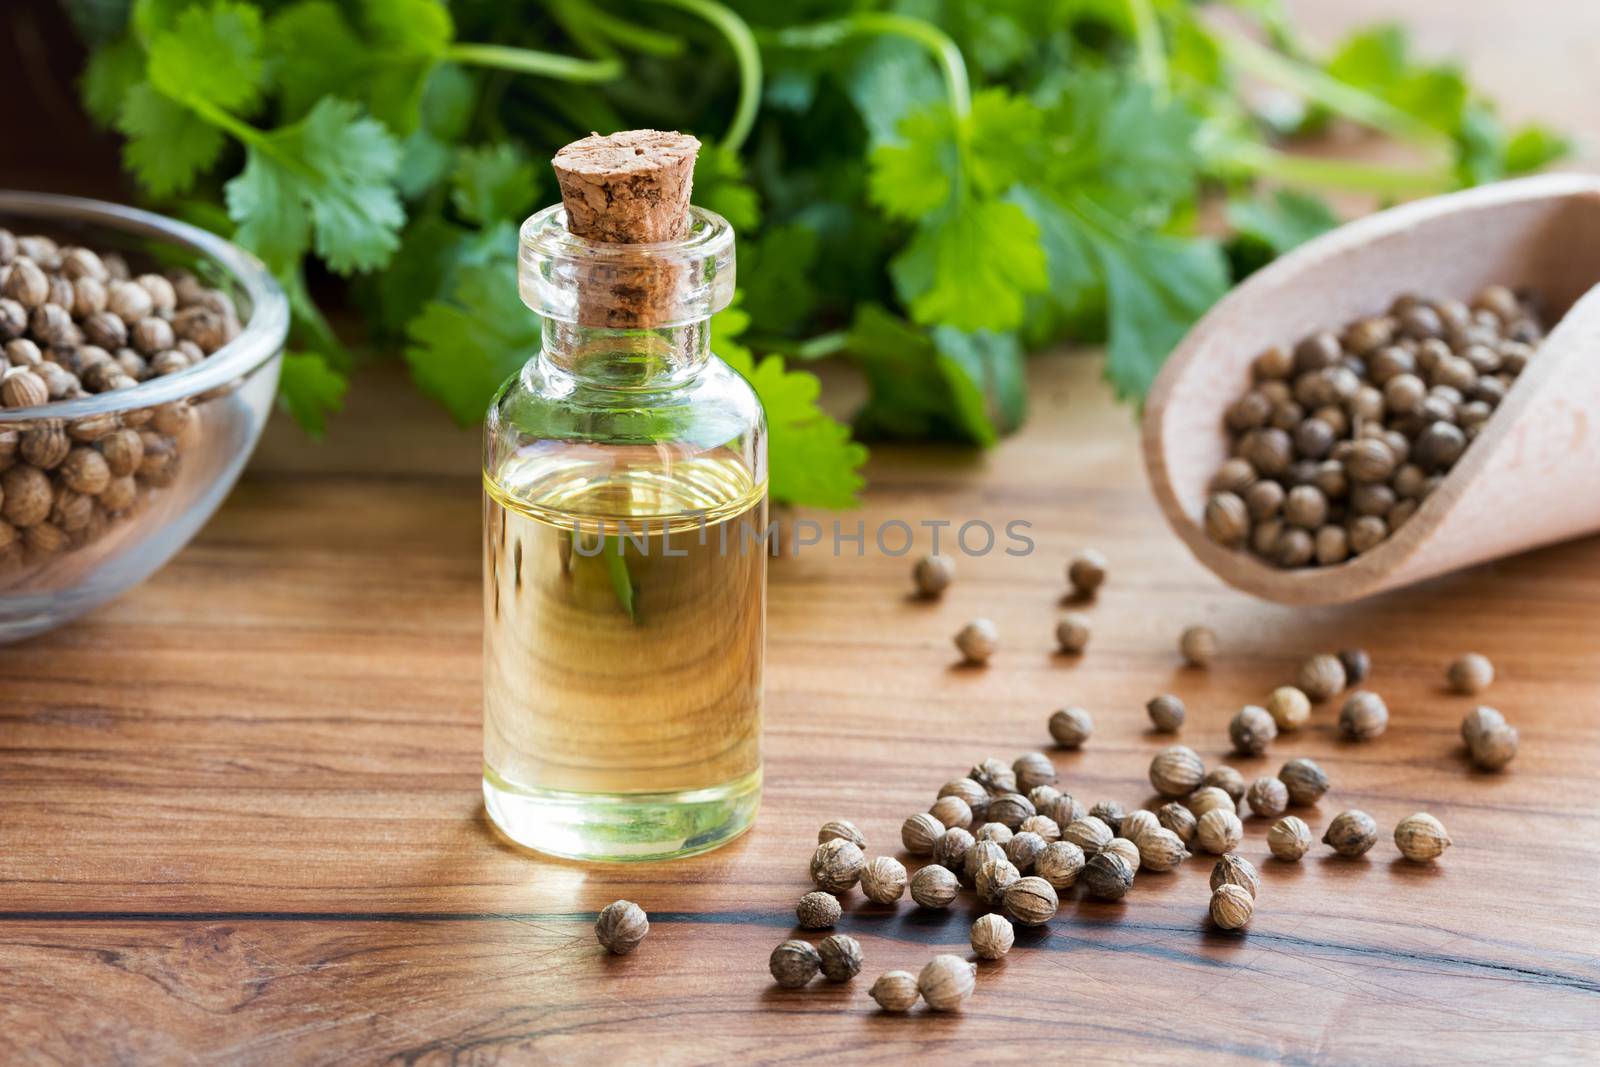 A bottle of coriander essential oil with coriander seeds and fresh cilantro leaves in the background